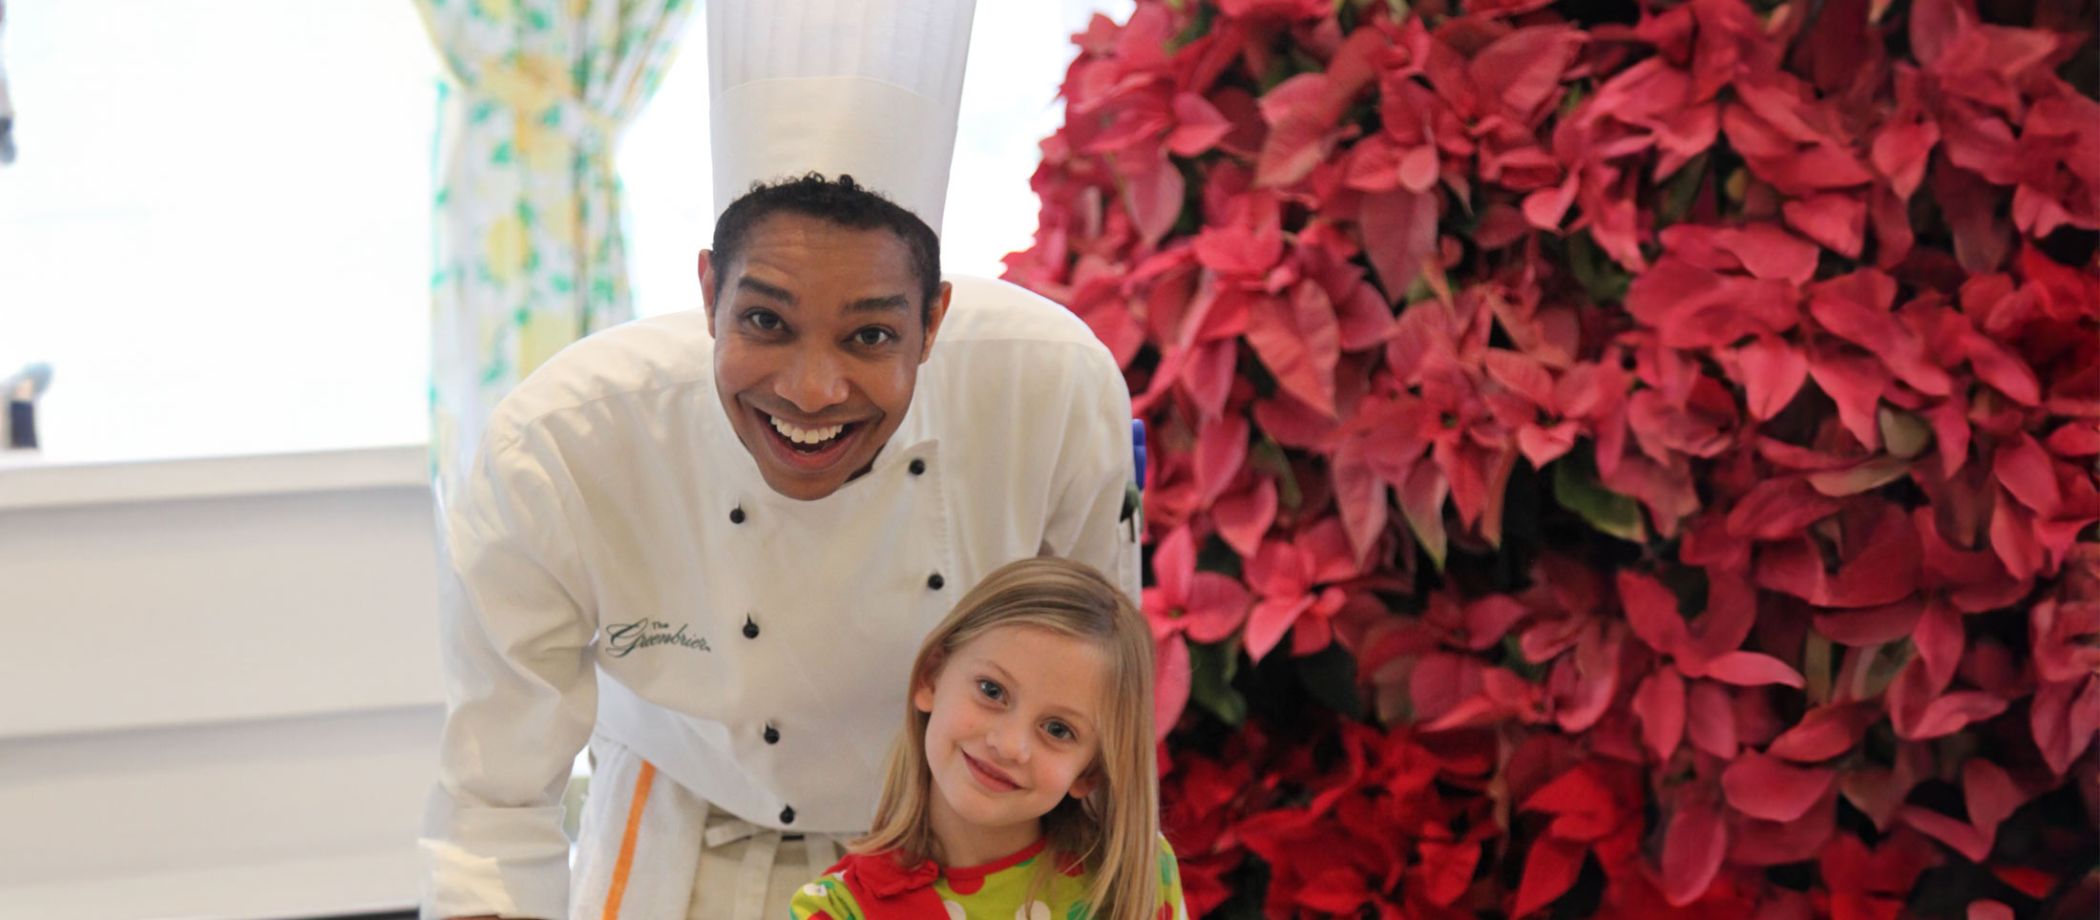 A chef and a child smiling